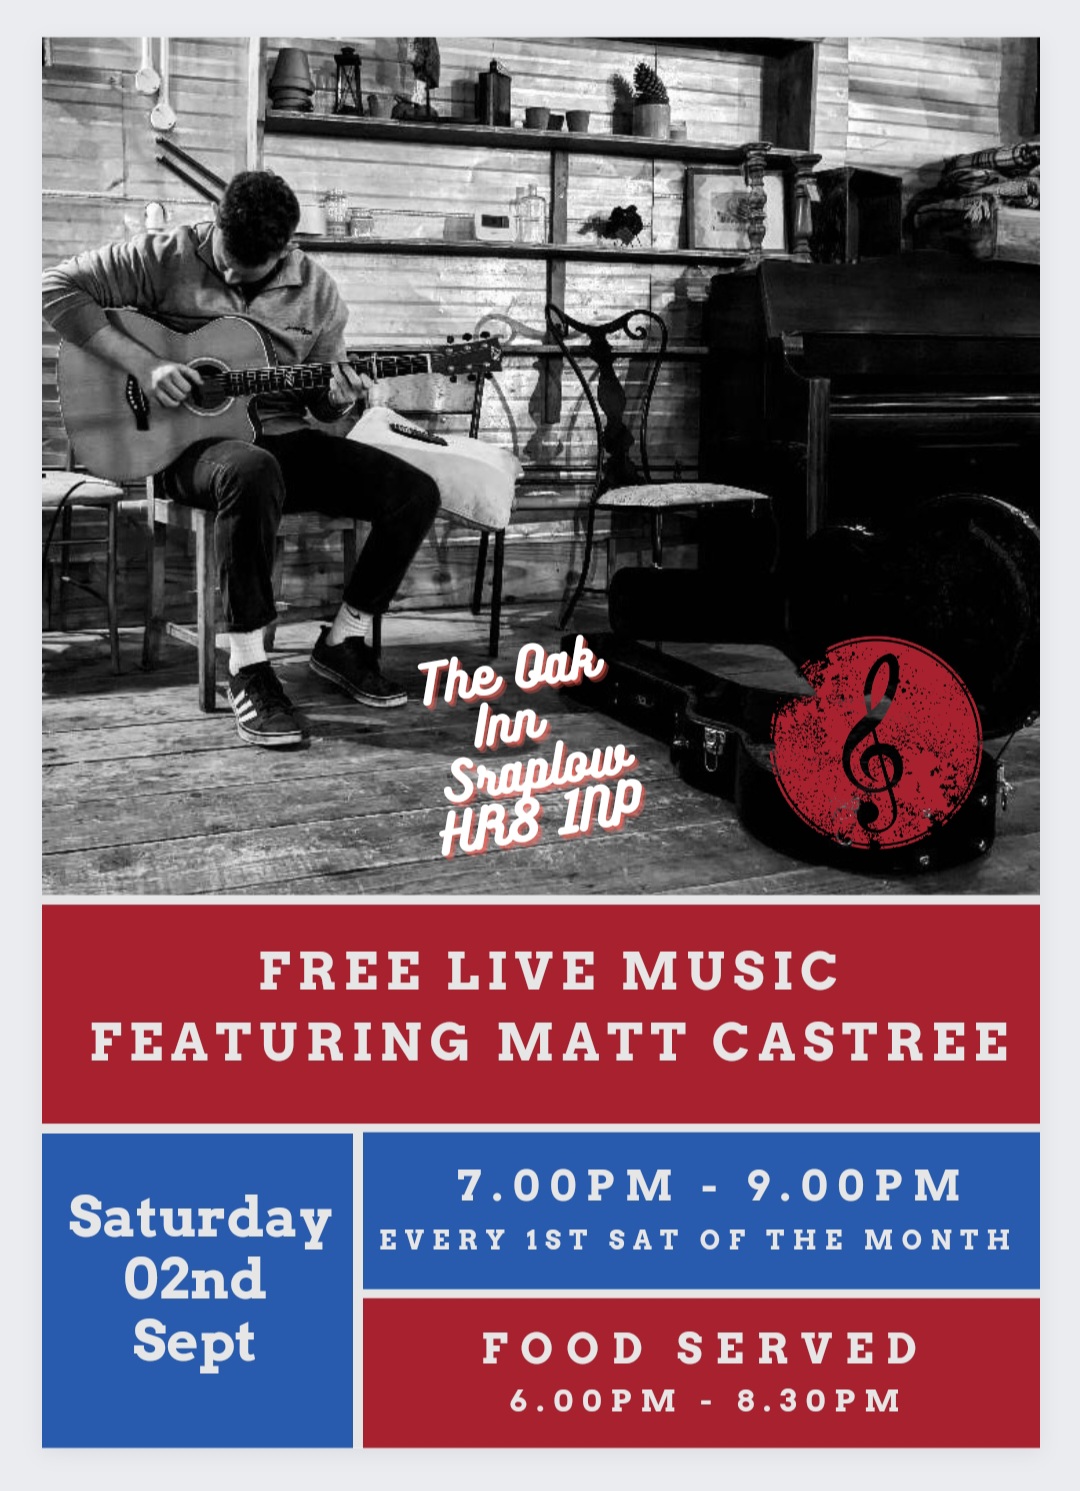 Local quitarist MATT CASTREE performs on SATURDAY 02nd September from 7pm until 9pm